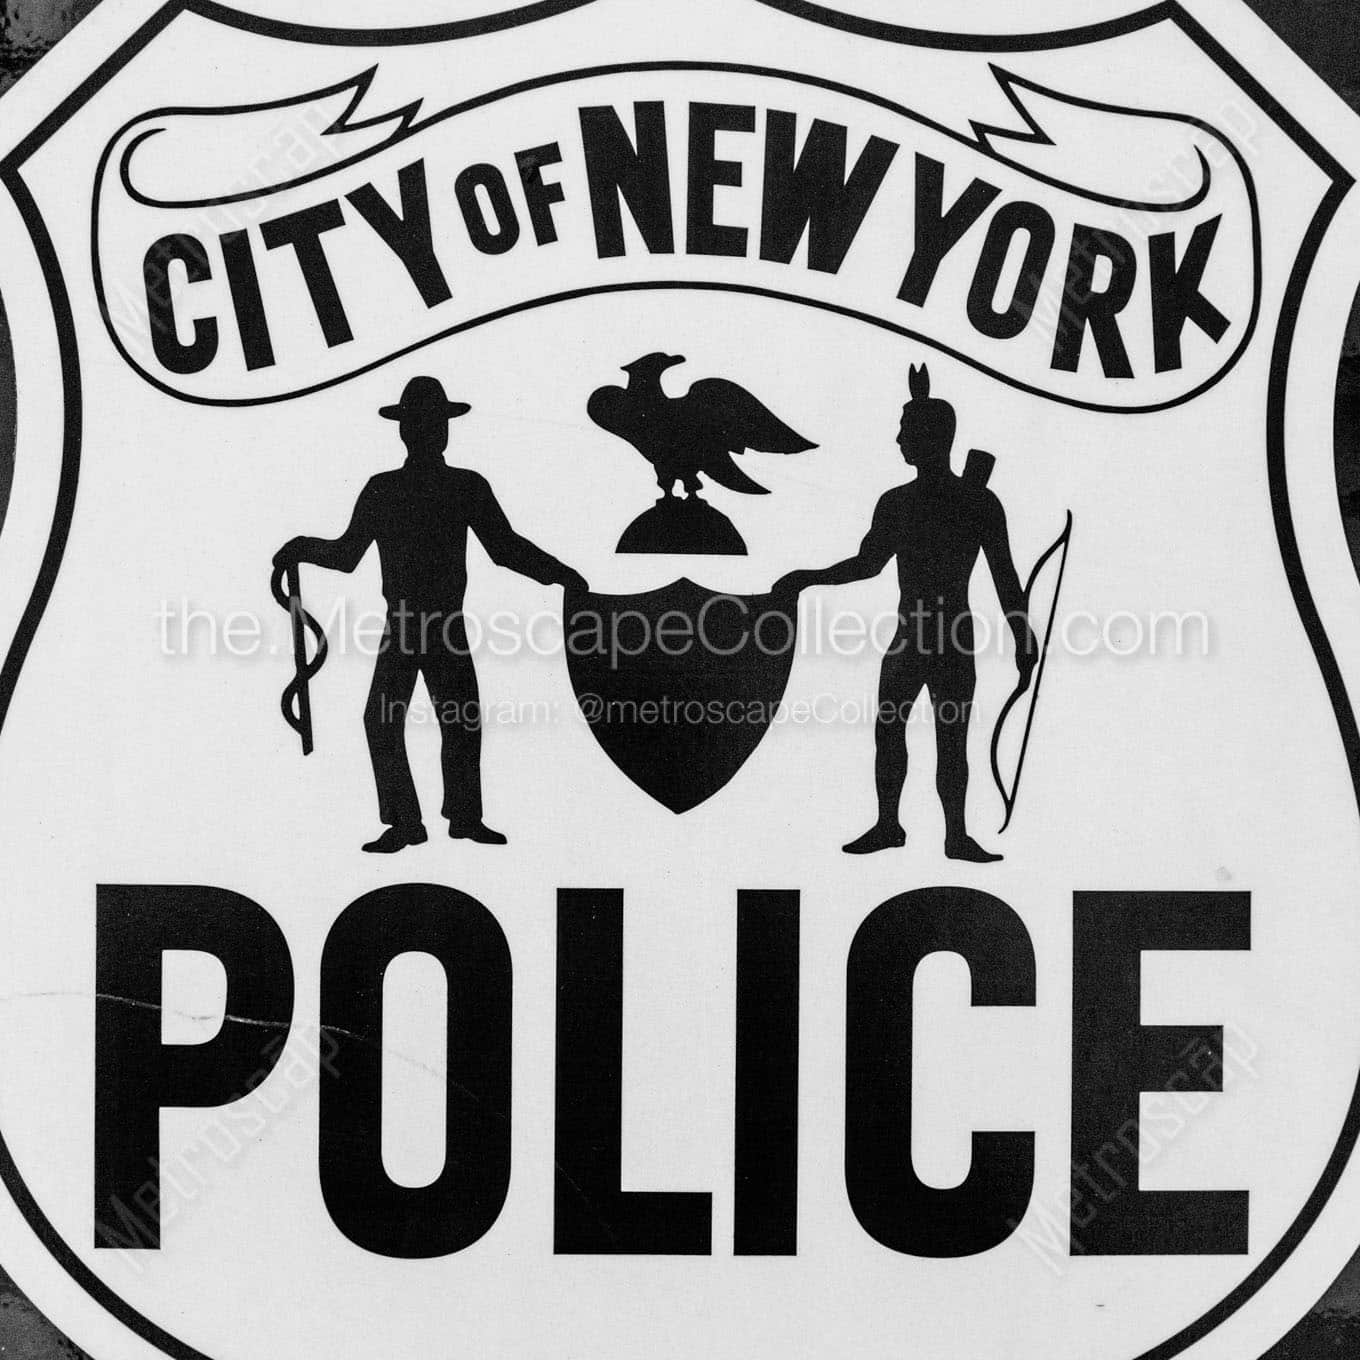 nypd paddy wagon seal Black & White Office Art